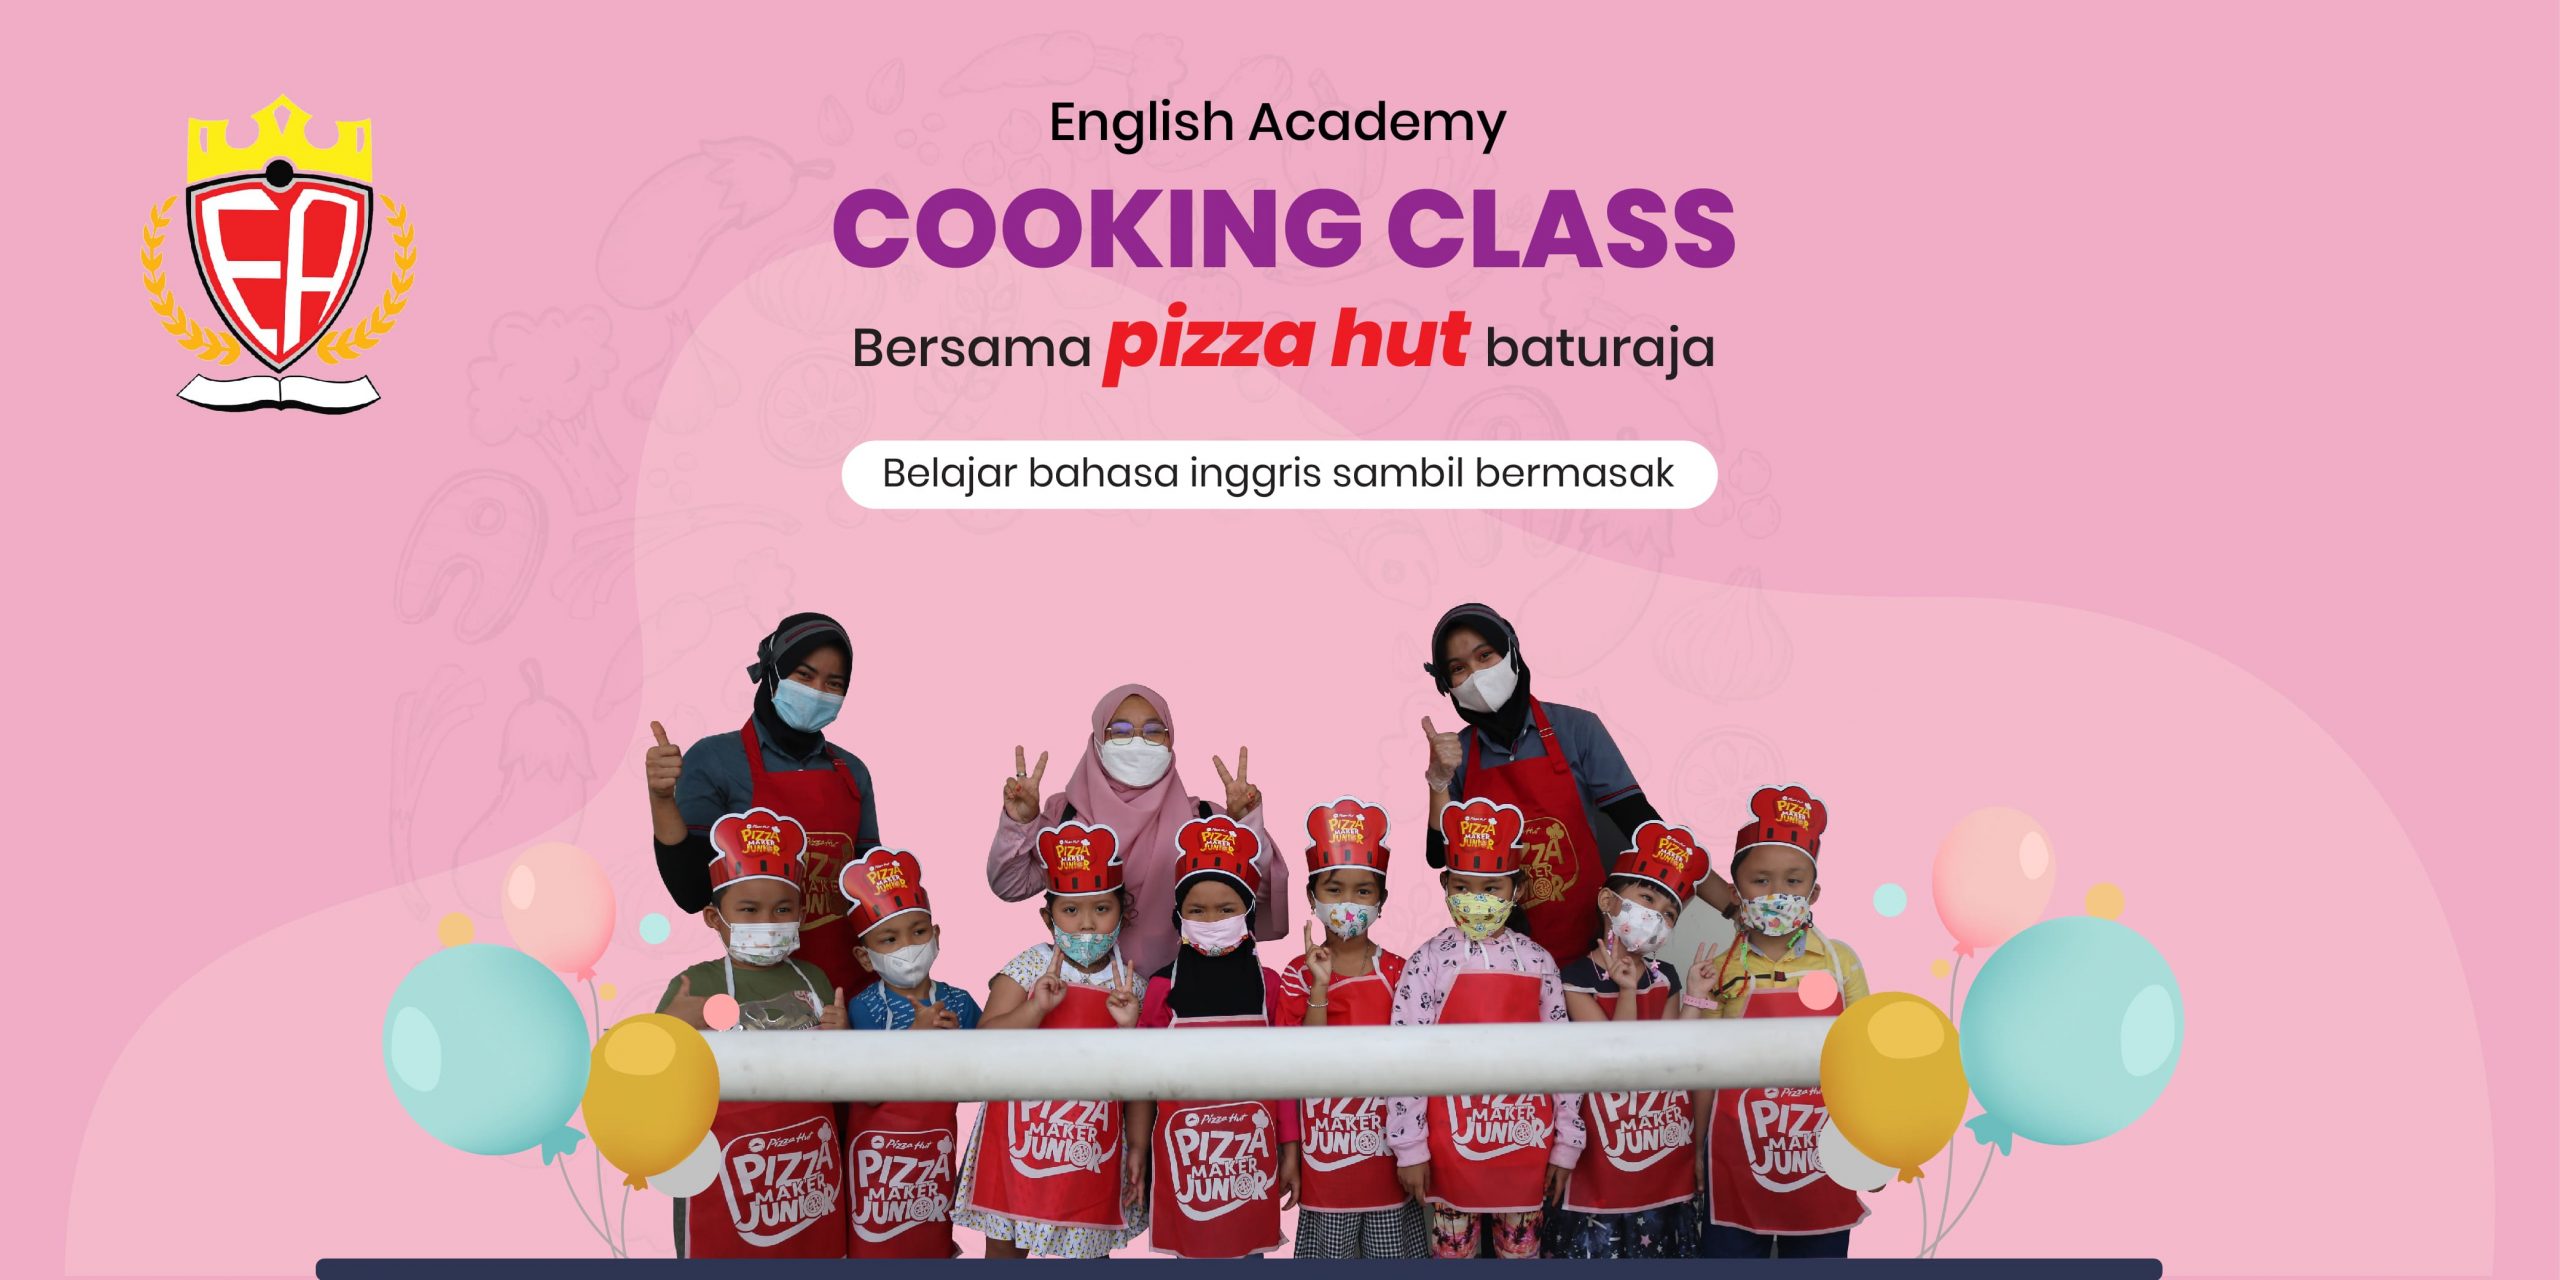 English Academy COOKING CLASS